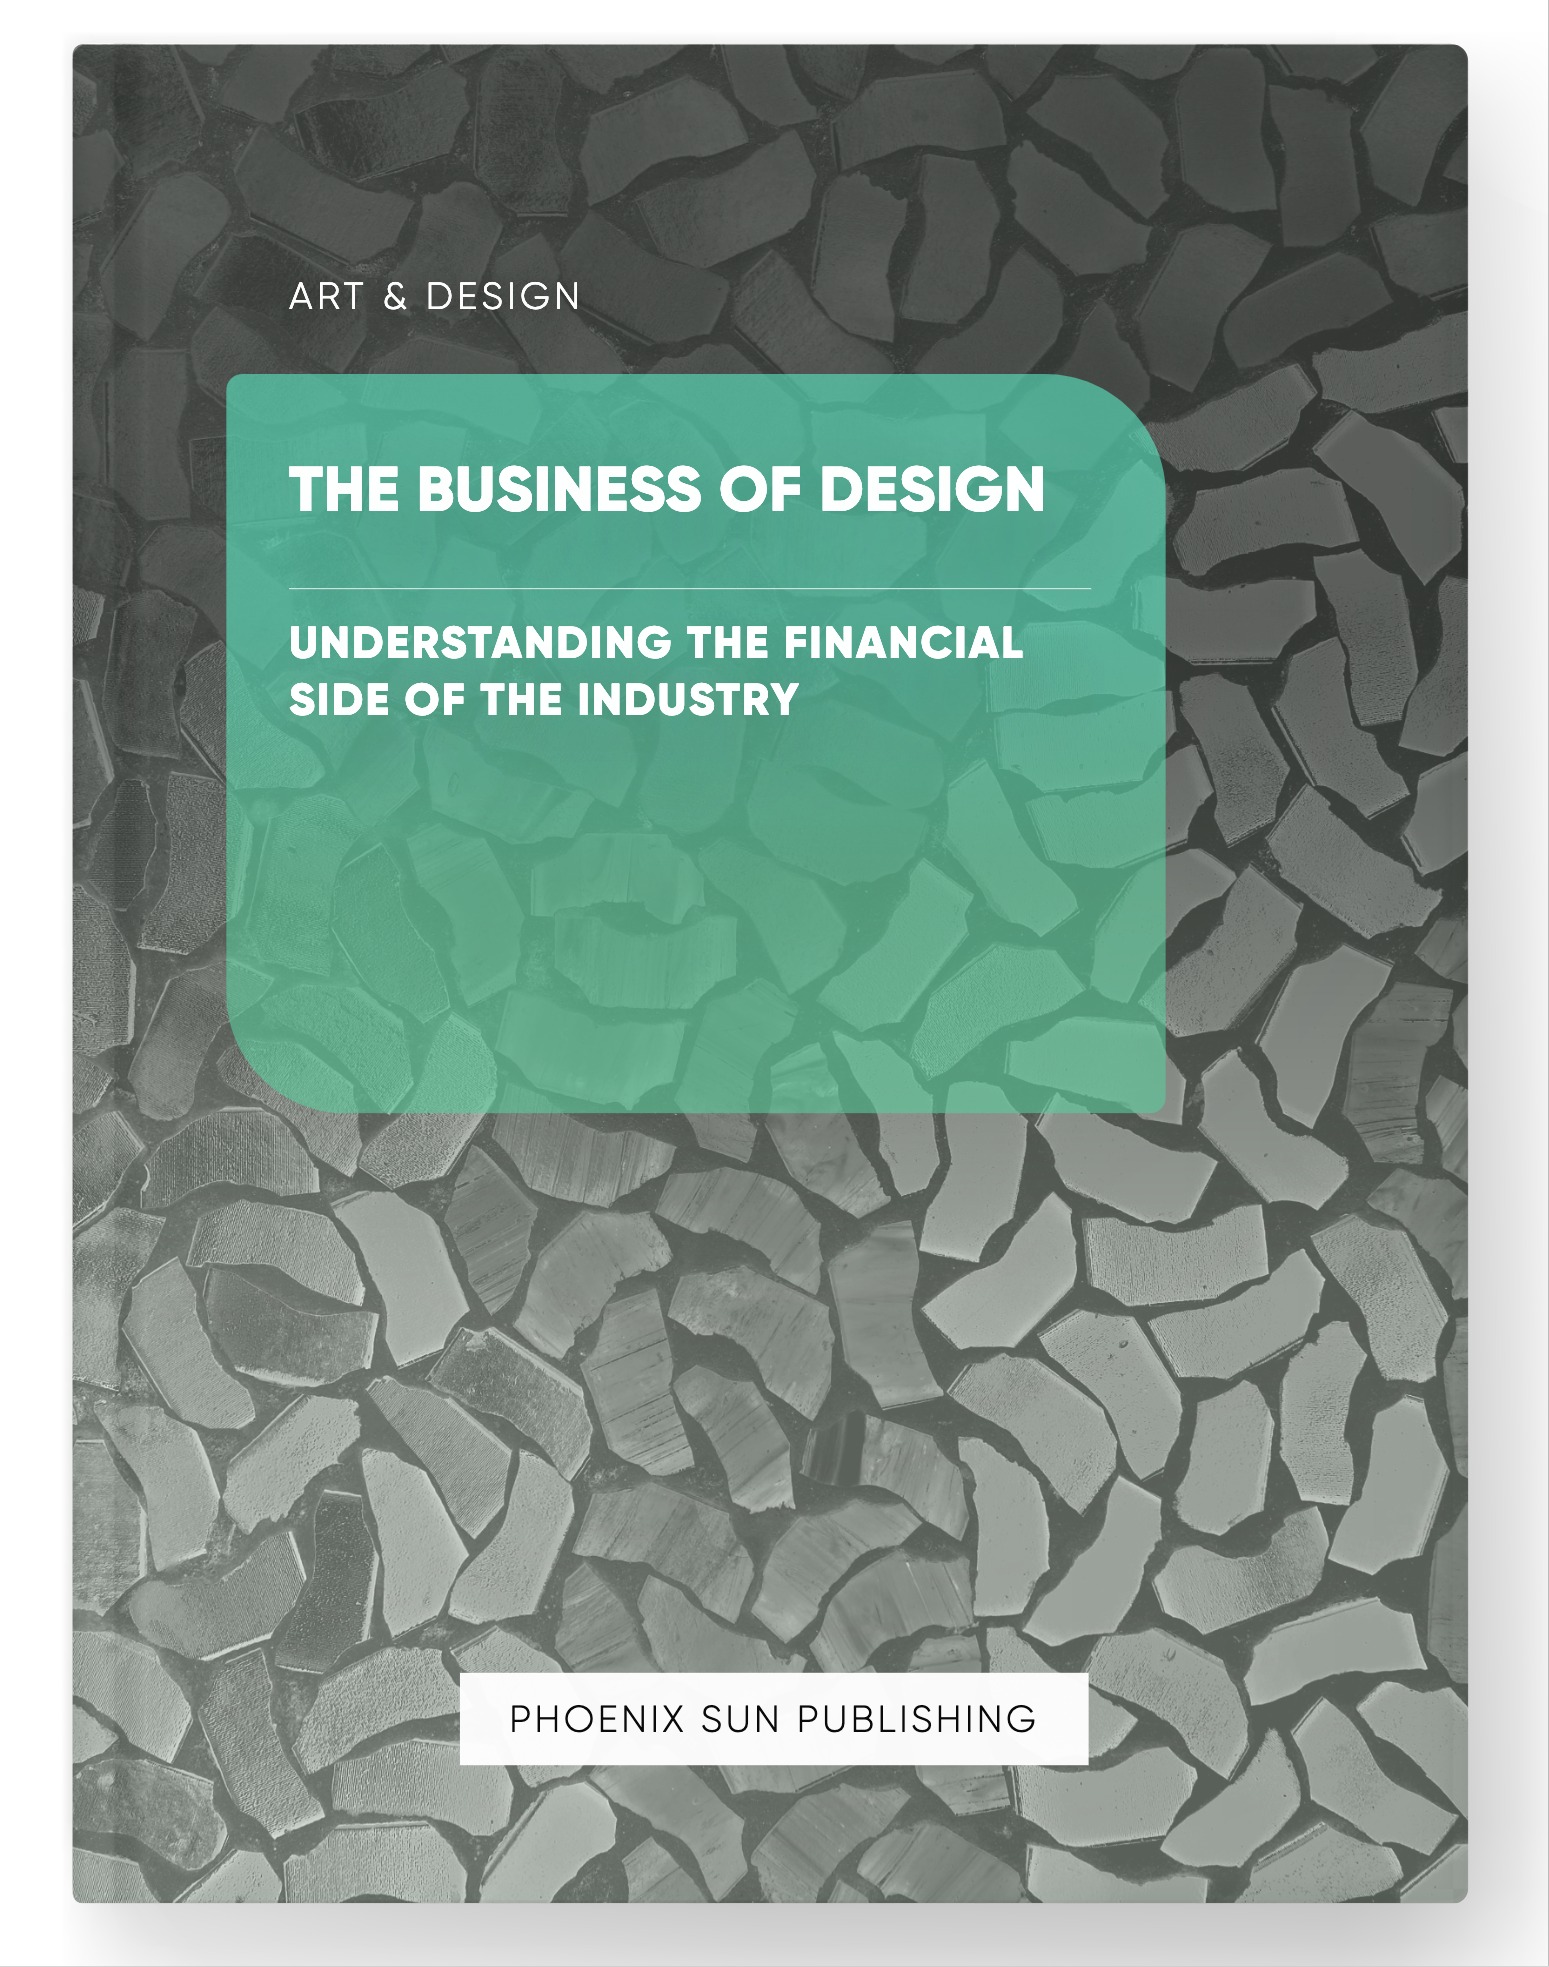 The Business of Design – Understanding the Financial Side of the Industry